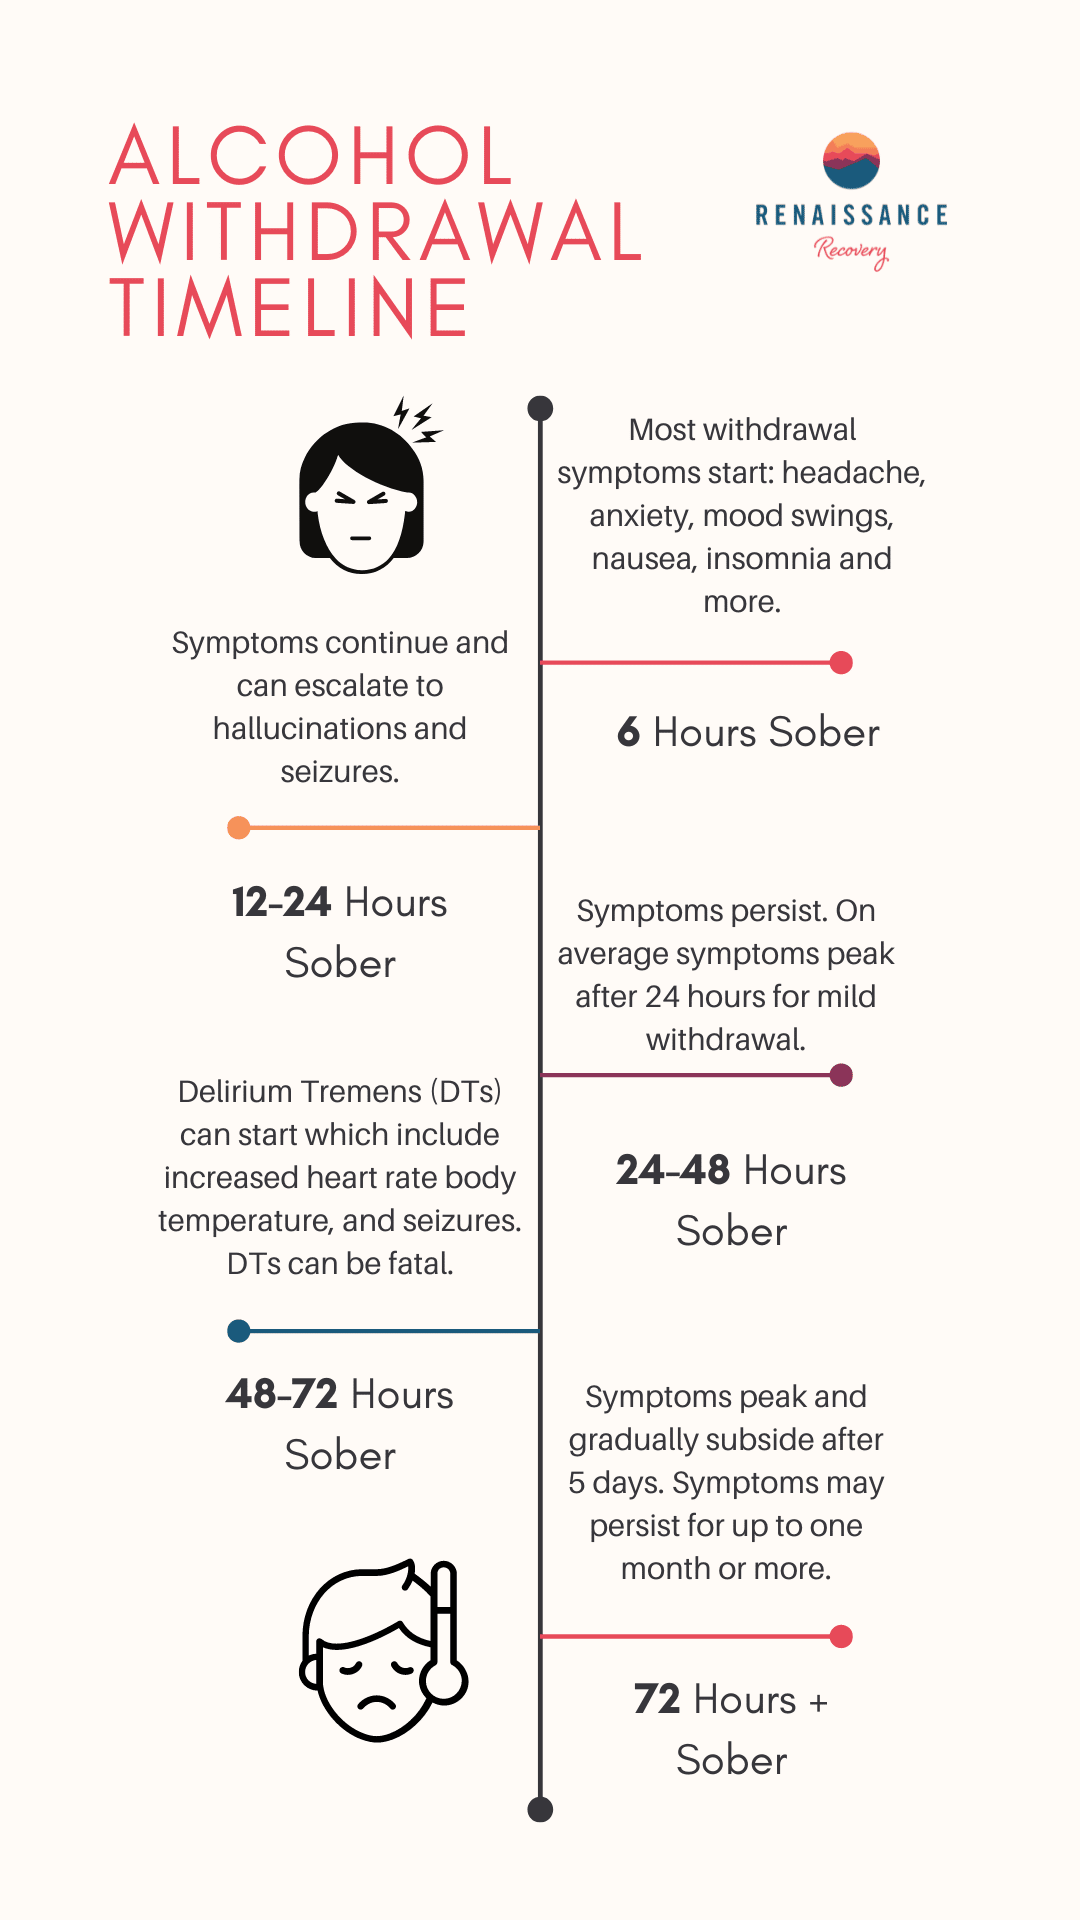 An infographic of the Alcohol Withdrawal Timeline